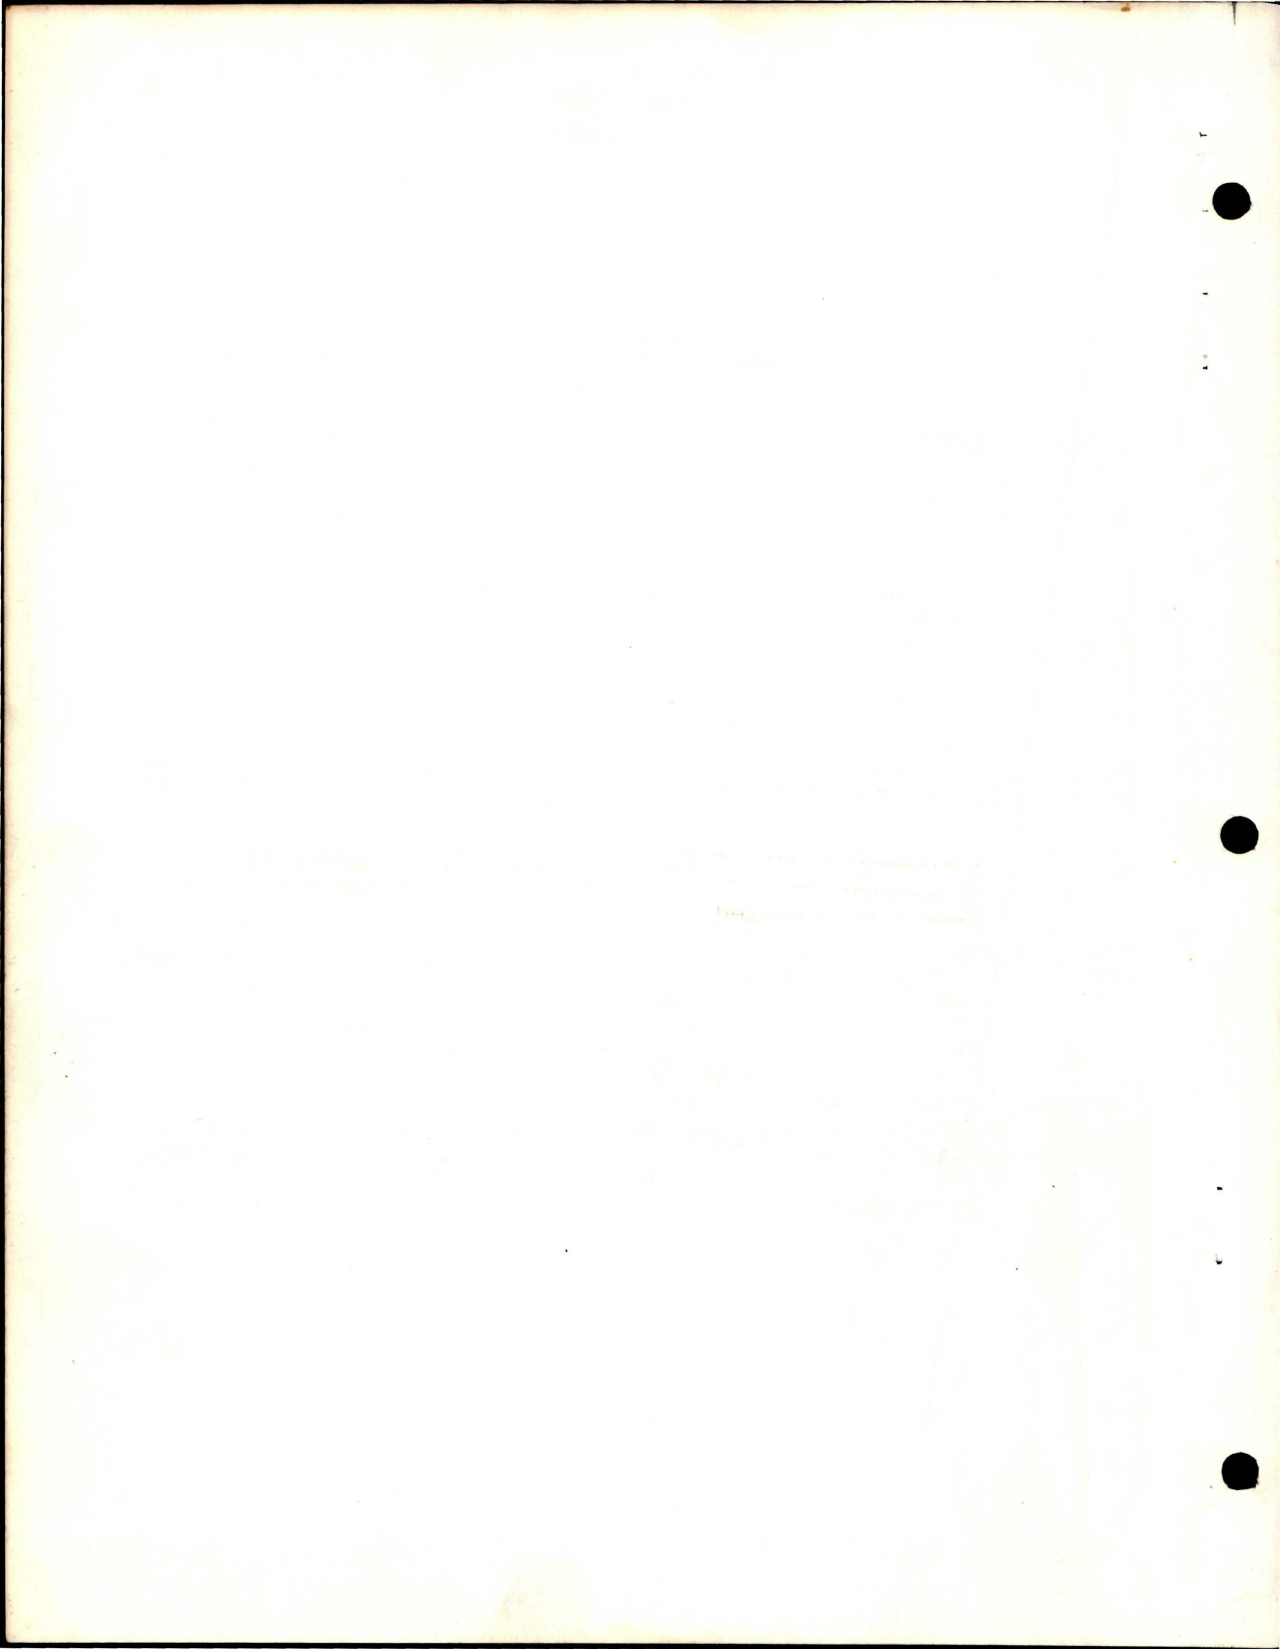 Sample page 8 from AirCorps Library document: Overhaul Manual for AC Generator - Part 976J119 Series